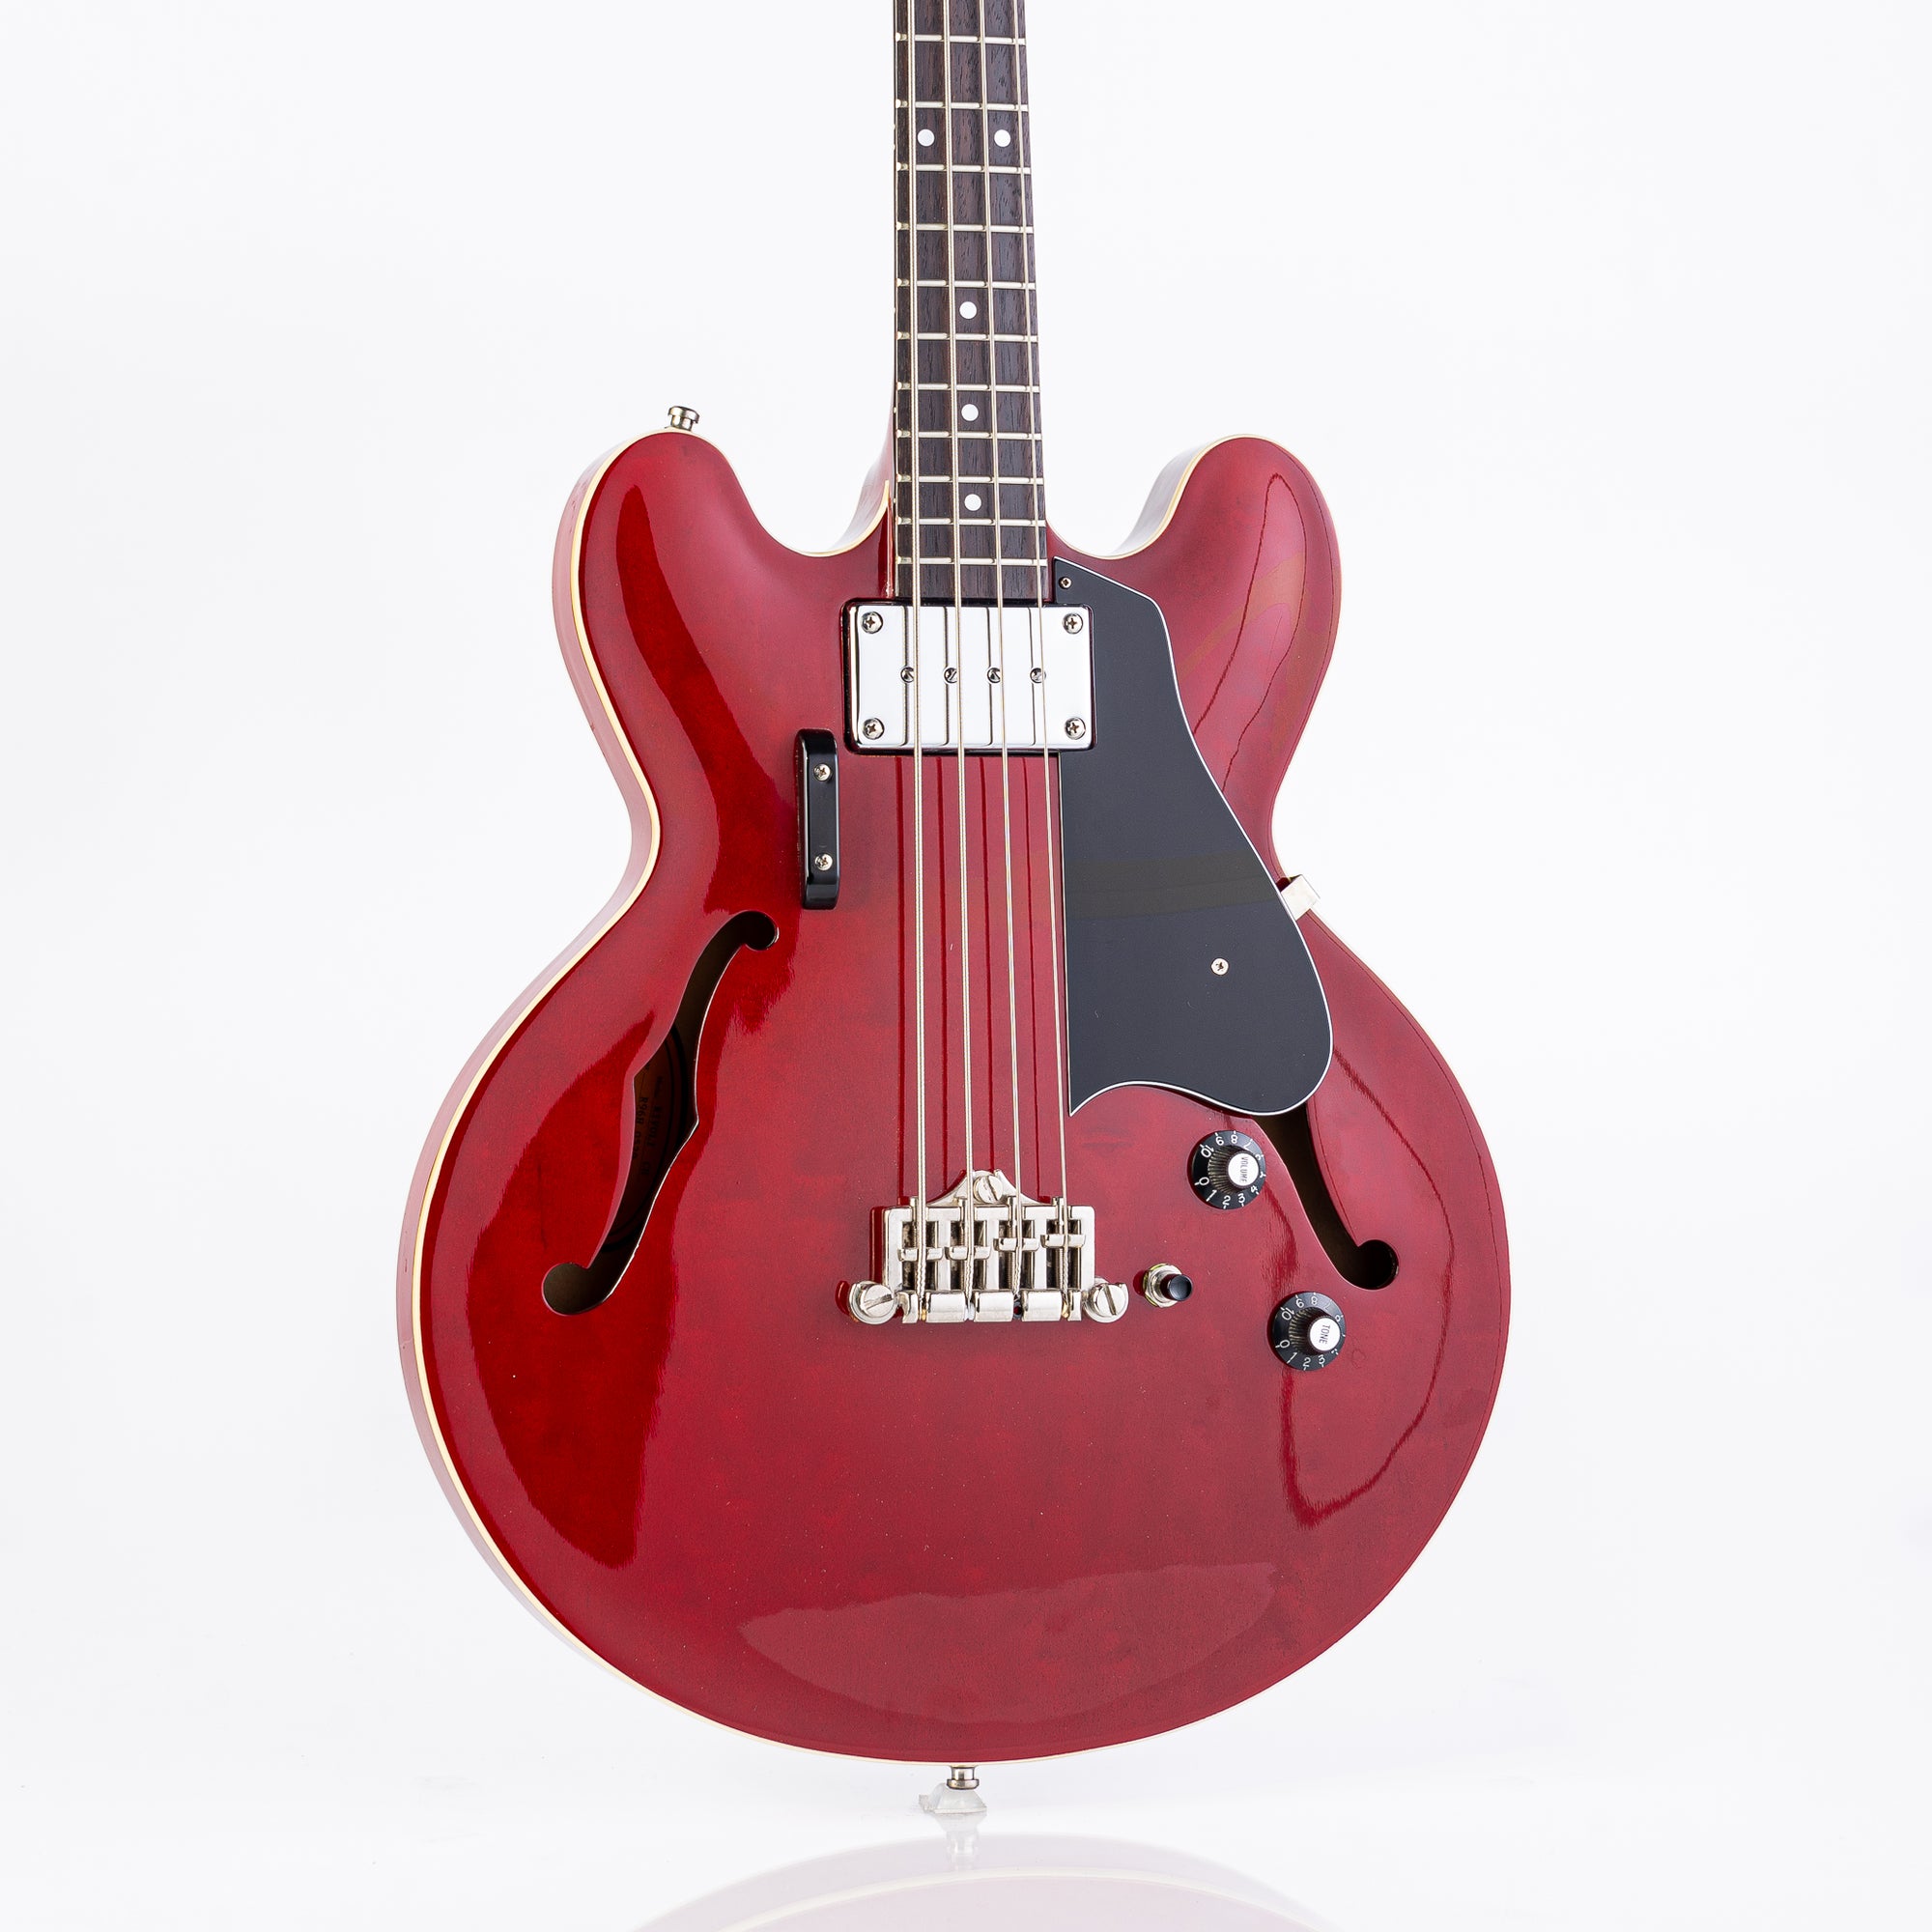 USED Epiphone Rivoli Reissue Semi-Hollow Electric Bass 1996- Transparent Cherry Red with HSC